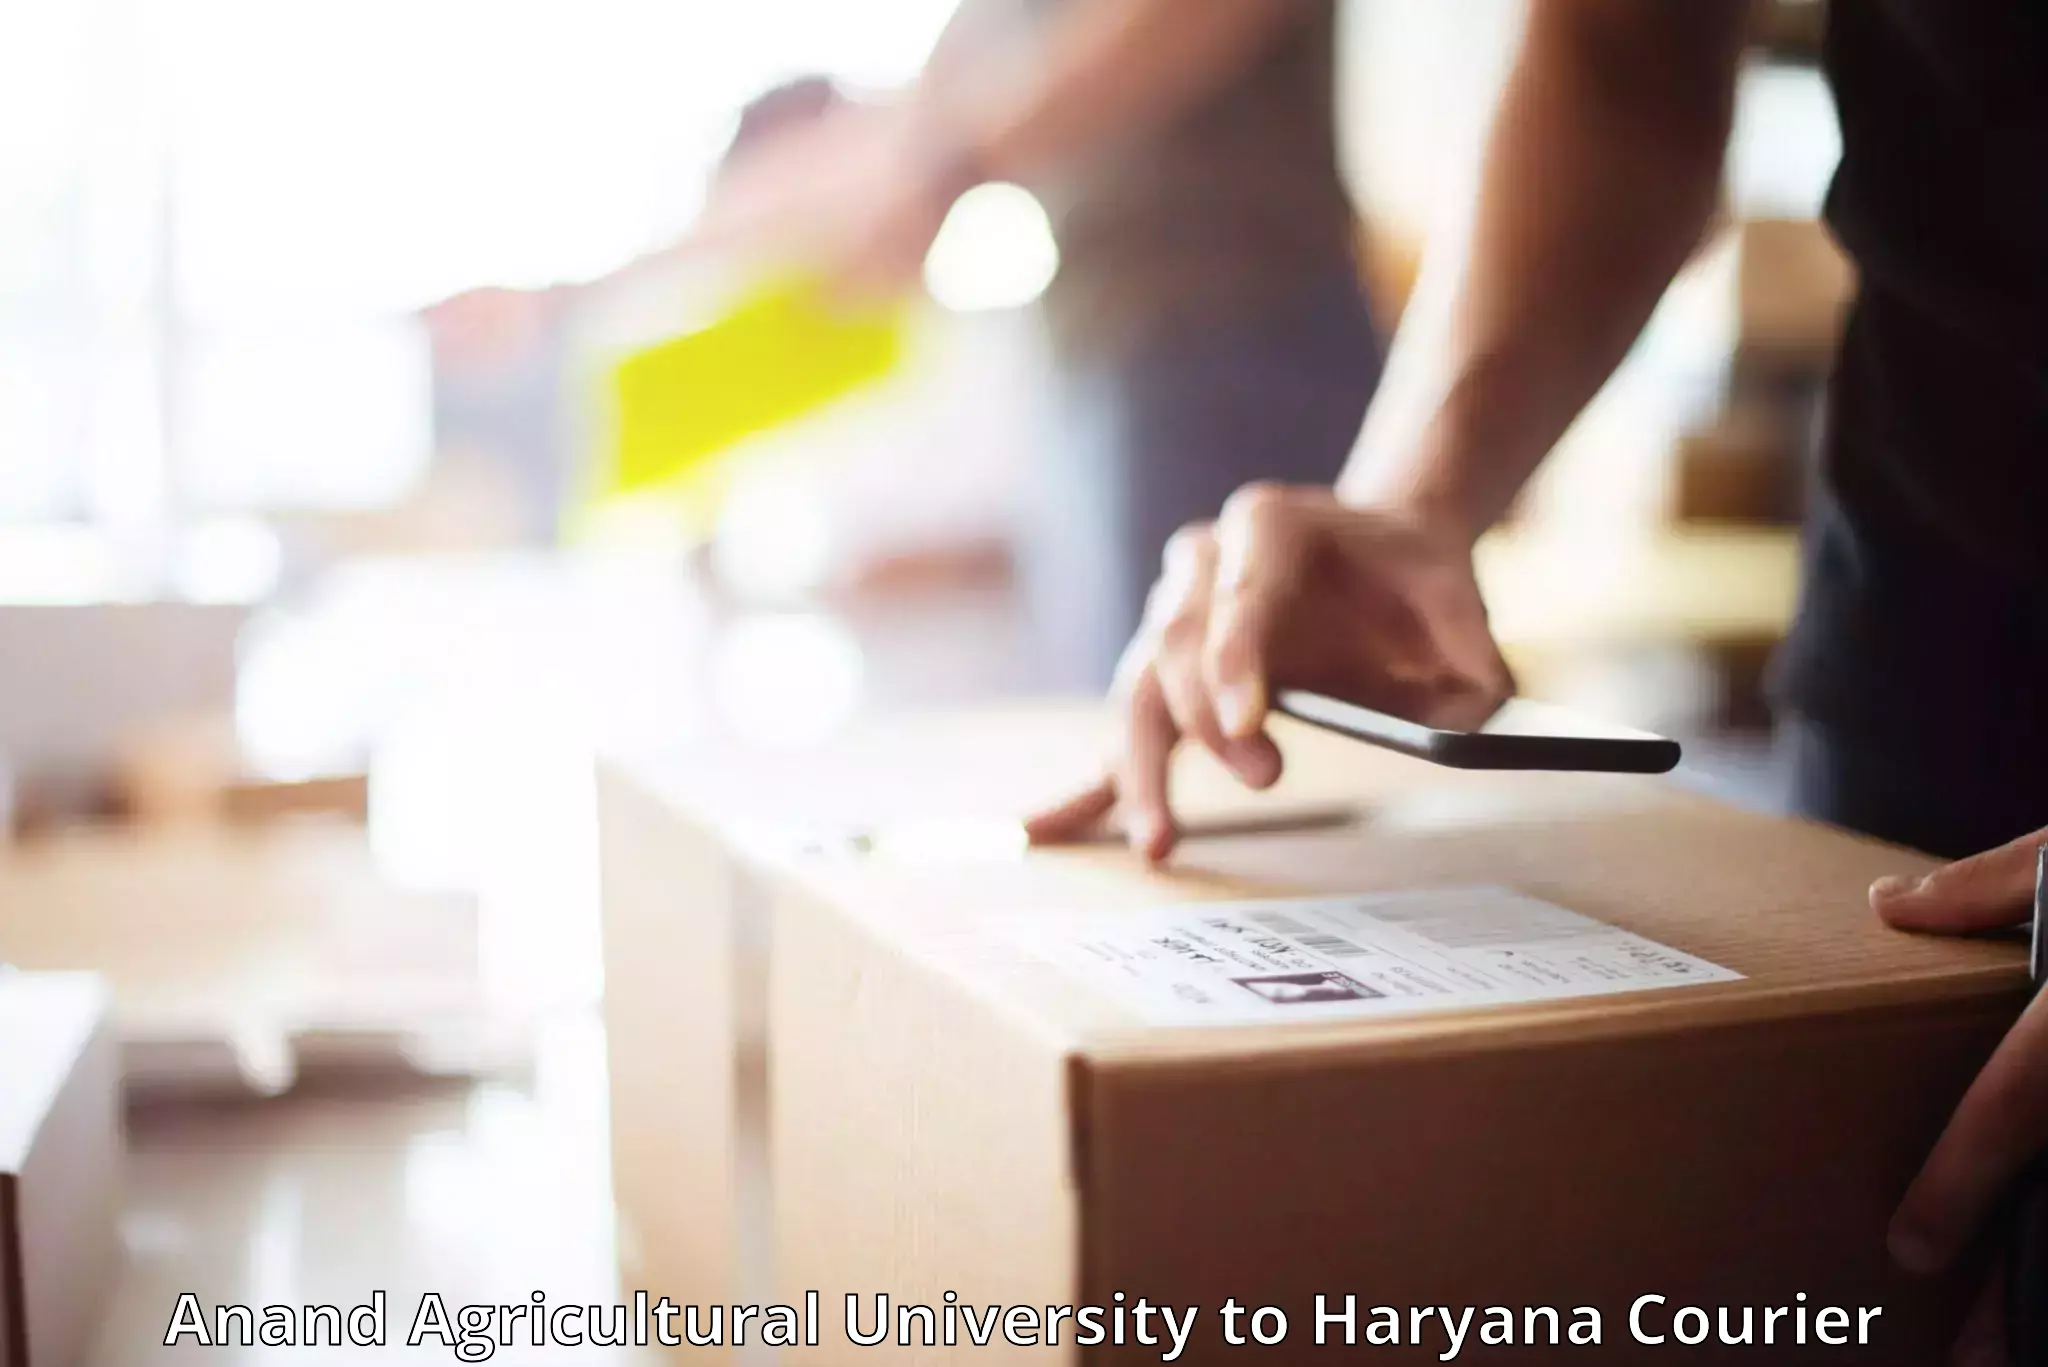 Urgent luggage shipment in Anand Agricultural University to Haryana